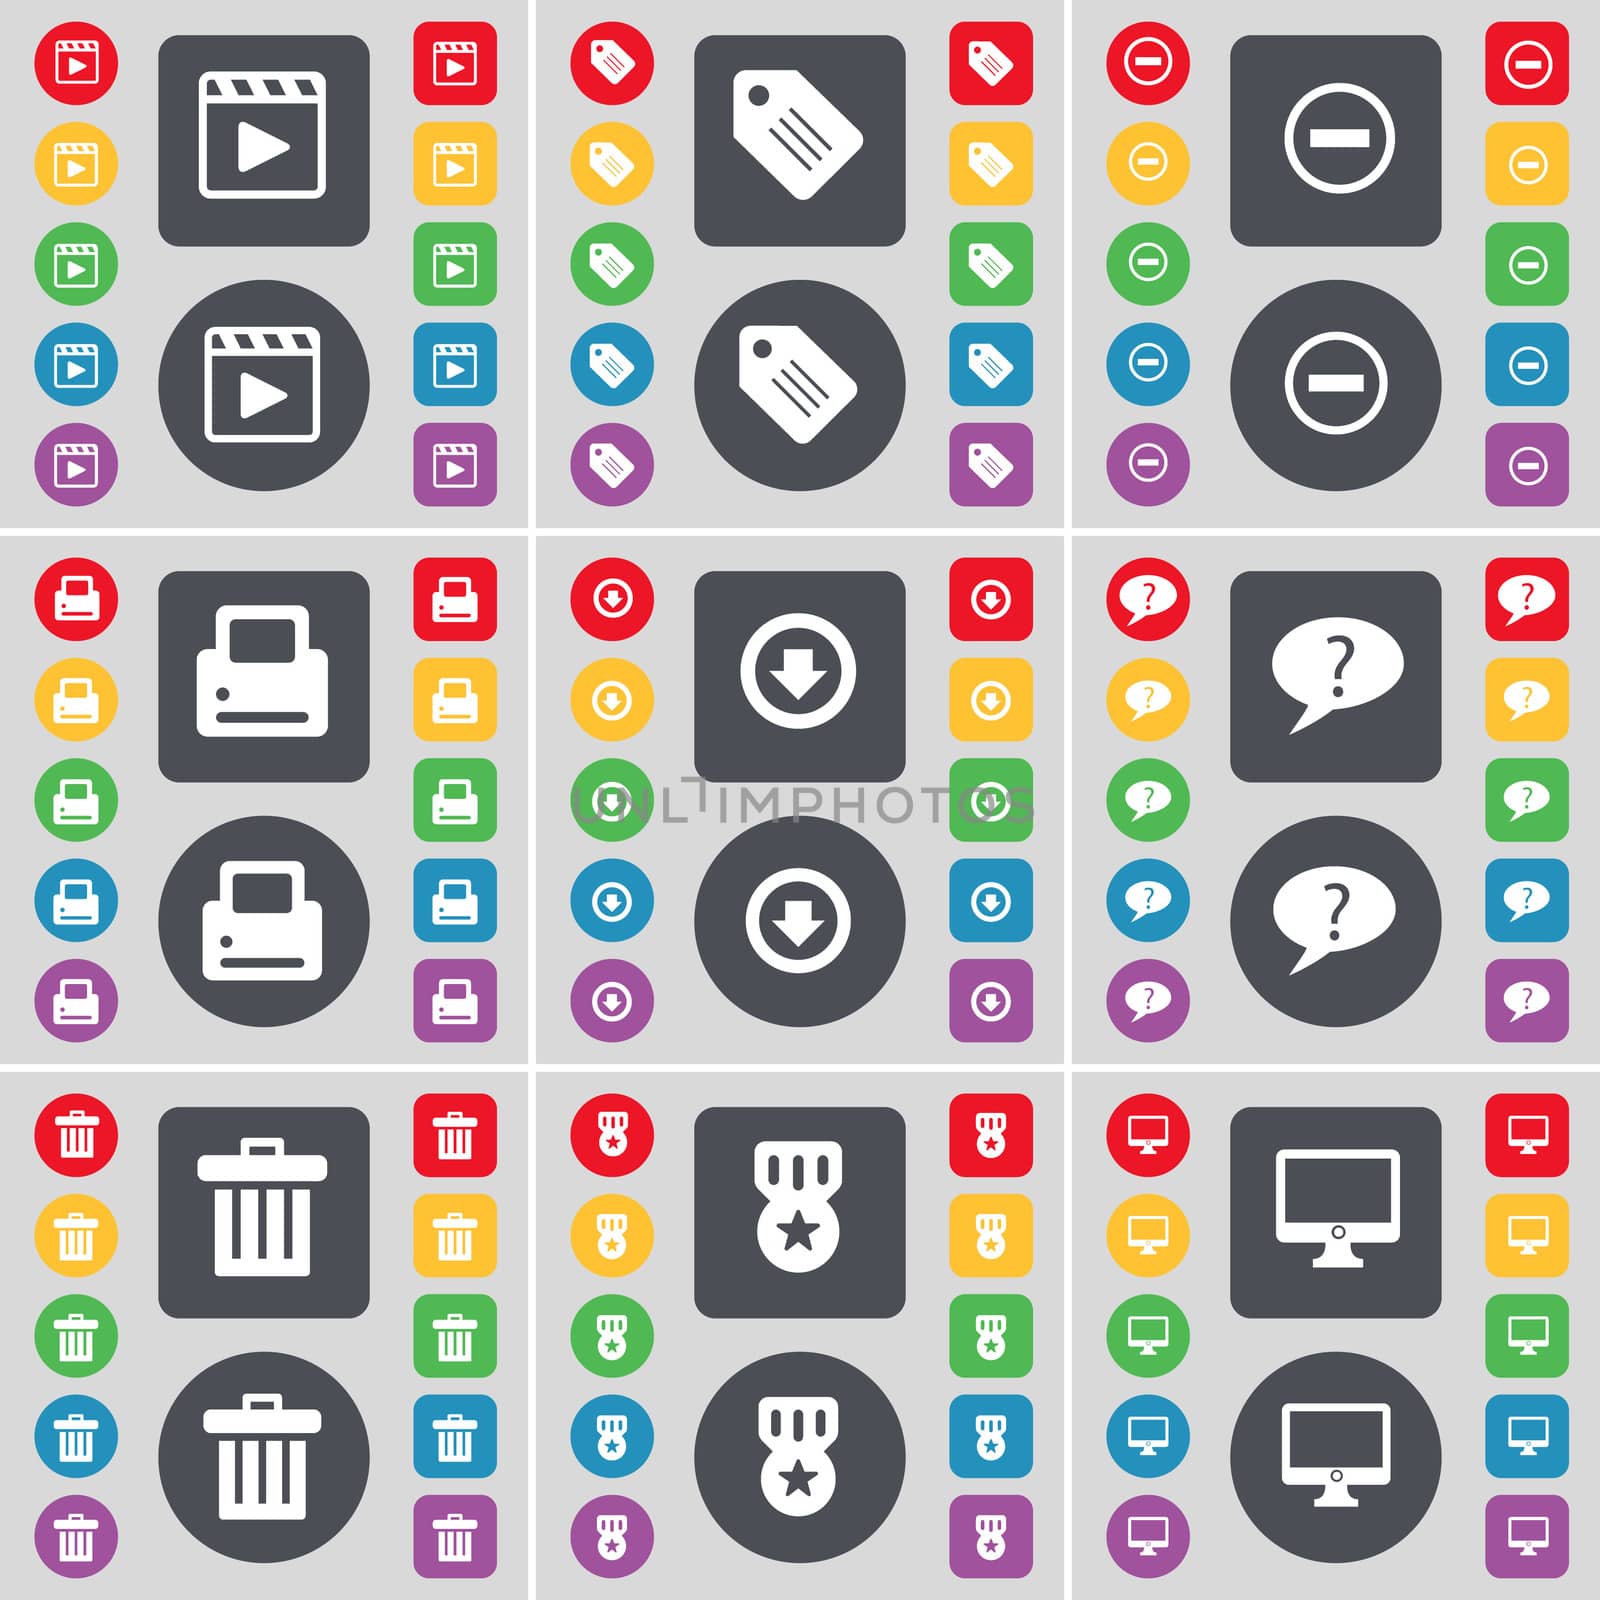 Media player, Tag, Minus, Printer, Arrow down, Chat bubble, Trash can, Medal, Monitor icon symbol. A large set of flat, colored buttons for your design. illustration